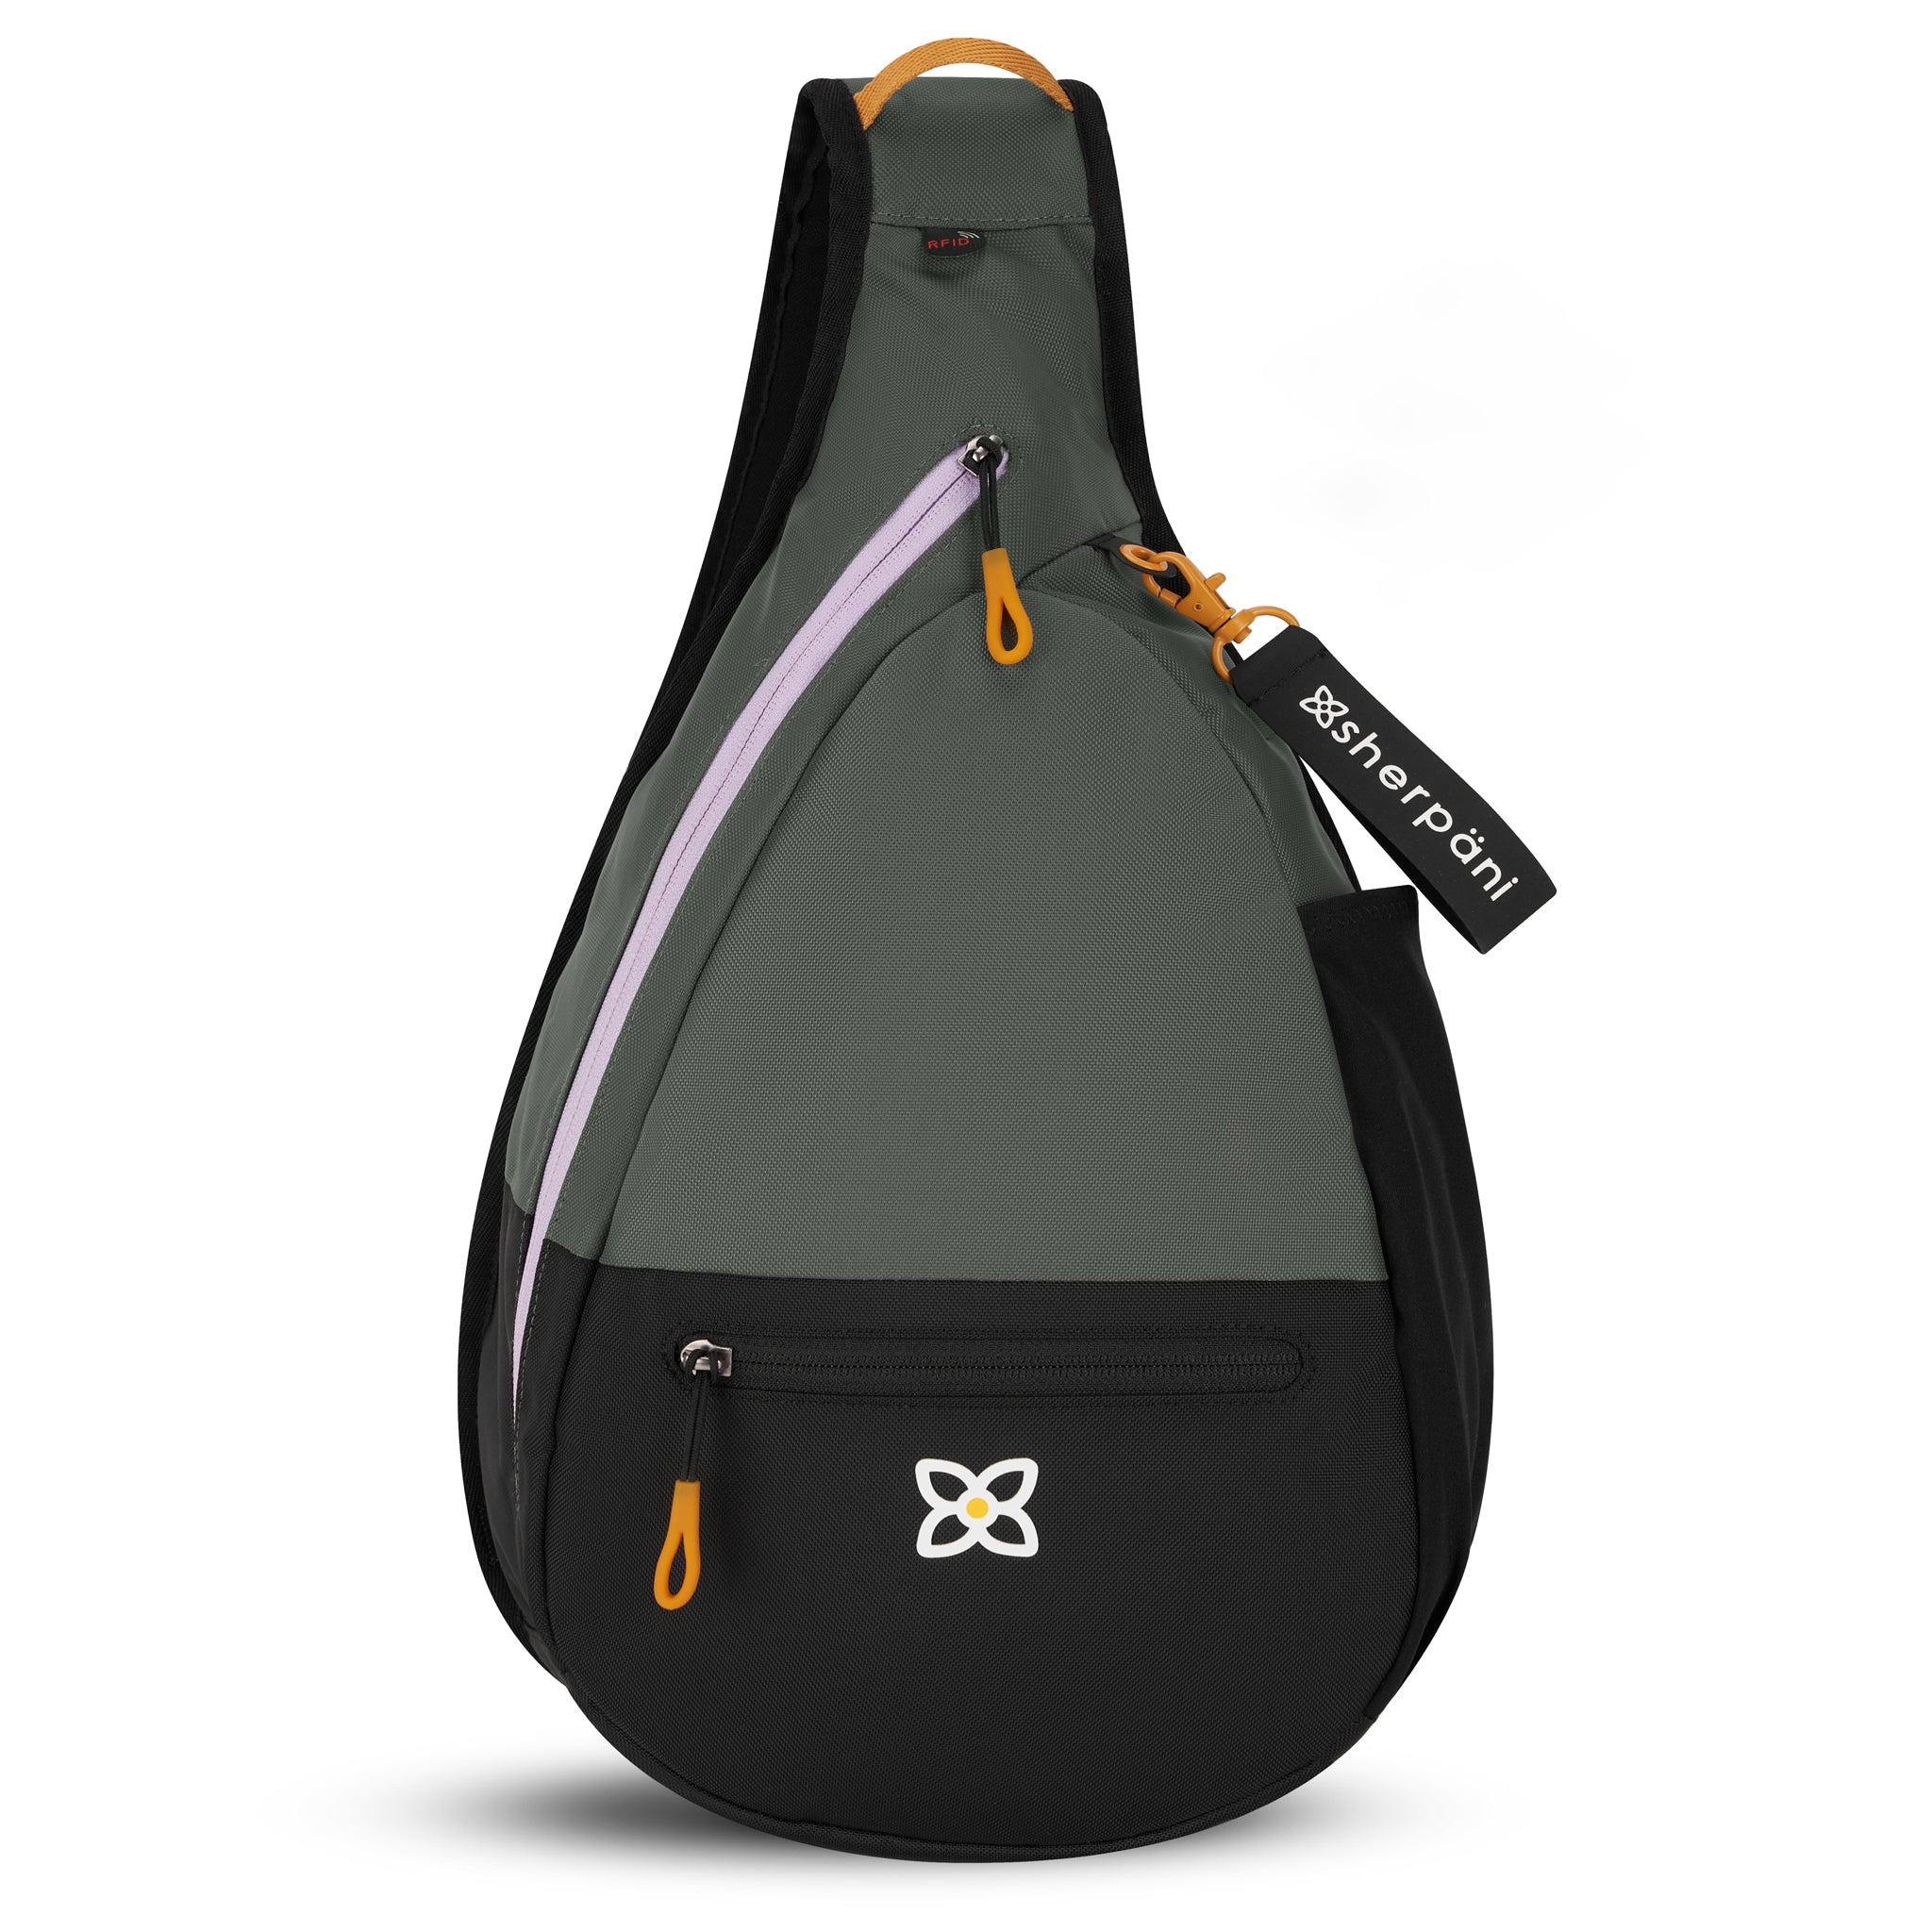 Flat front view of Sherpani sling backpack for women, the Esprit in Juniper. Esprit features include front zipper pocket, side zipper pocket, inside mesh pocket, RFID blocking, detachable key chain and an adjustable sling strap. The Juniper color is two-toned in black and gray with accents in lavender and yellow. 